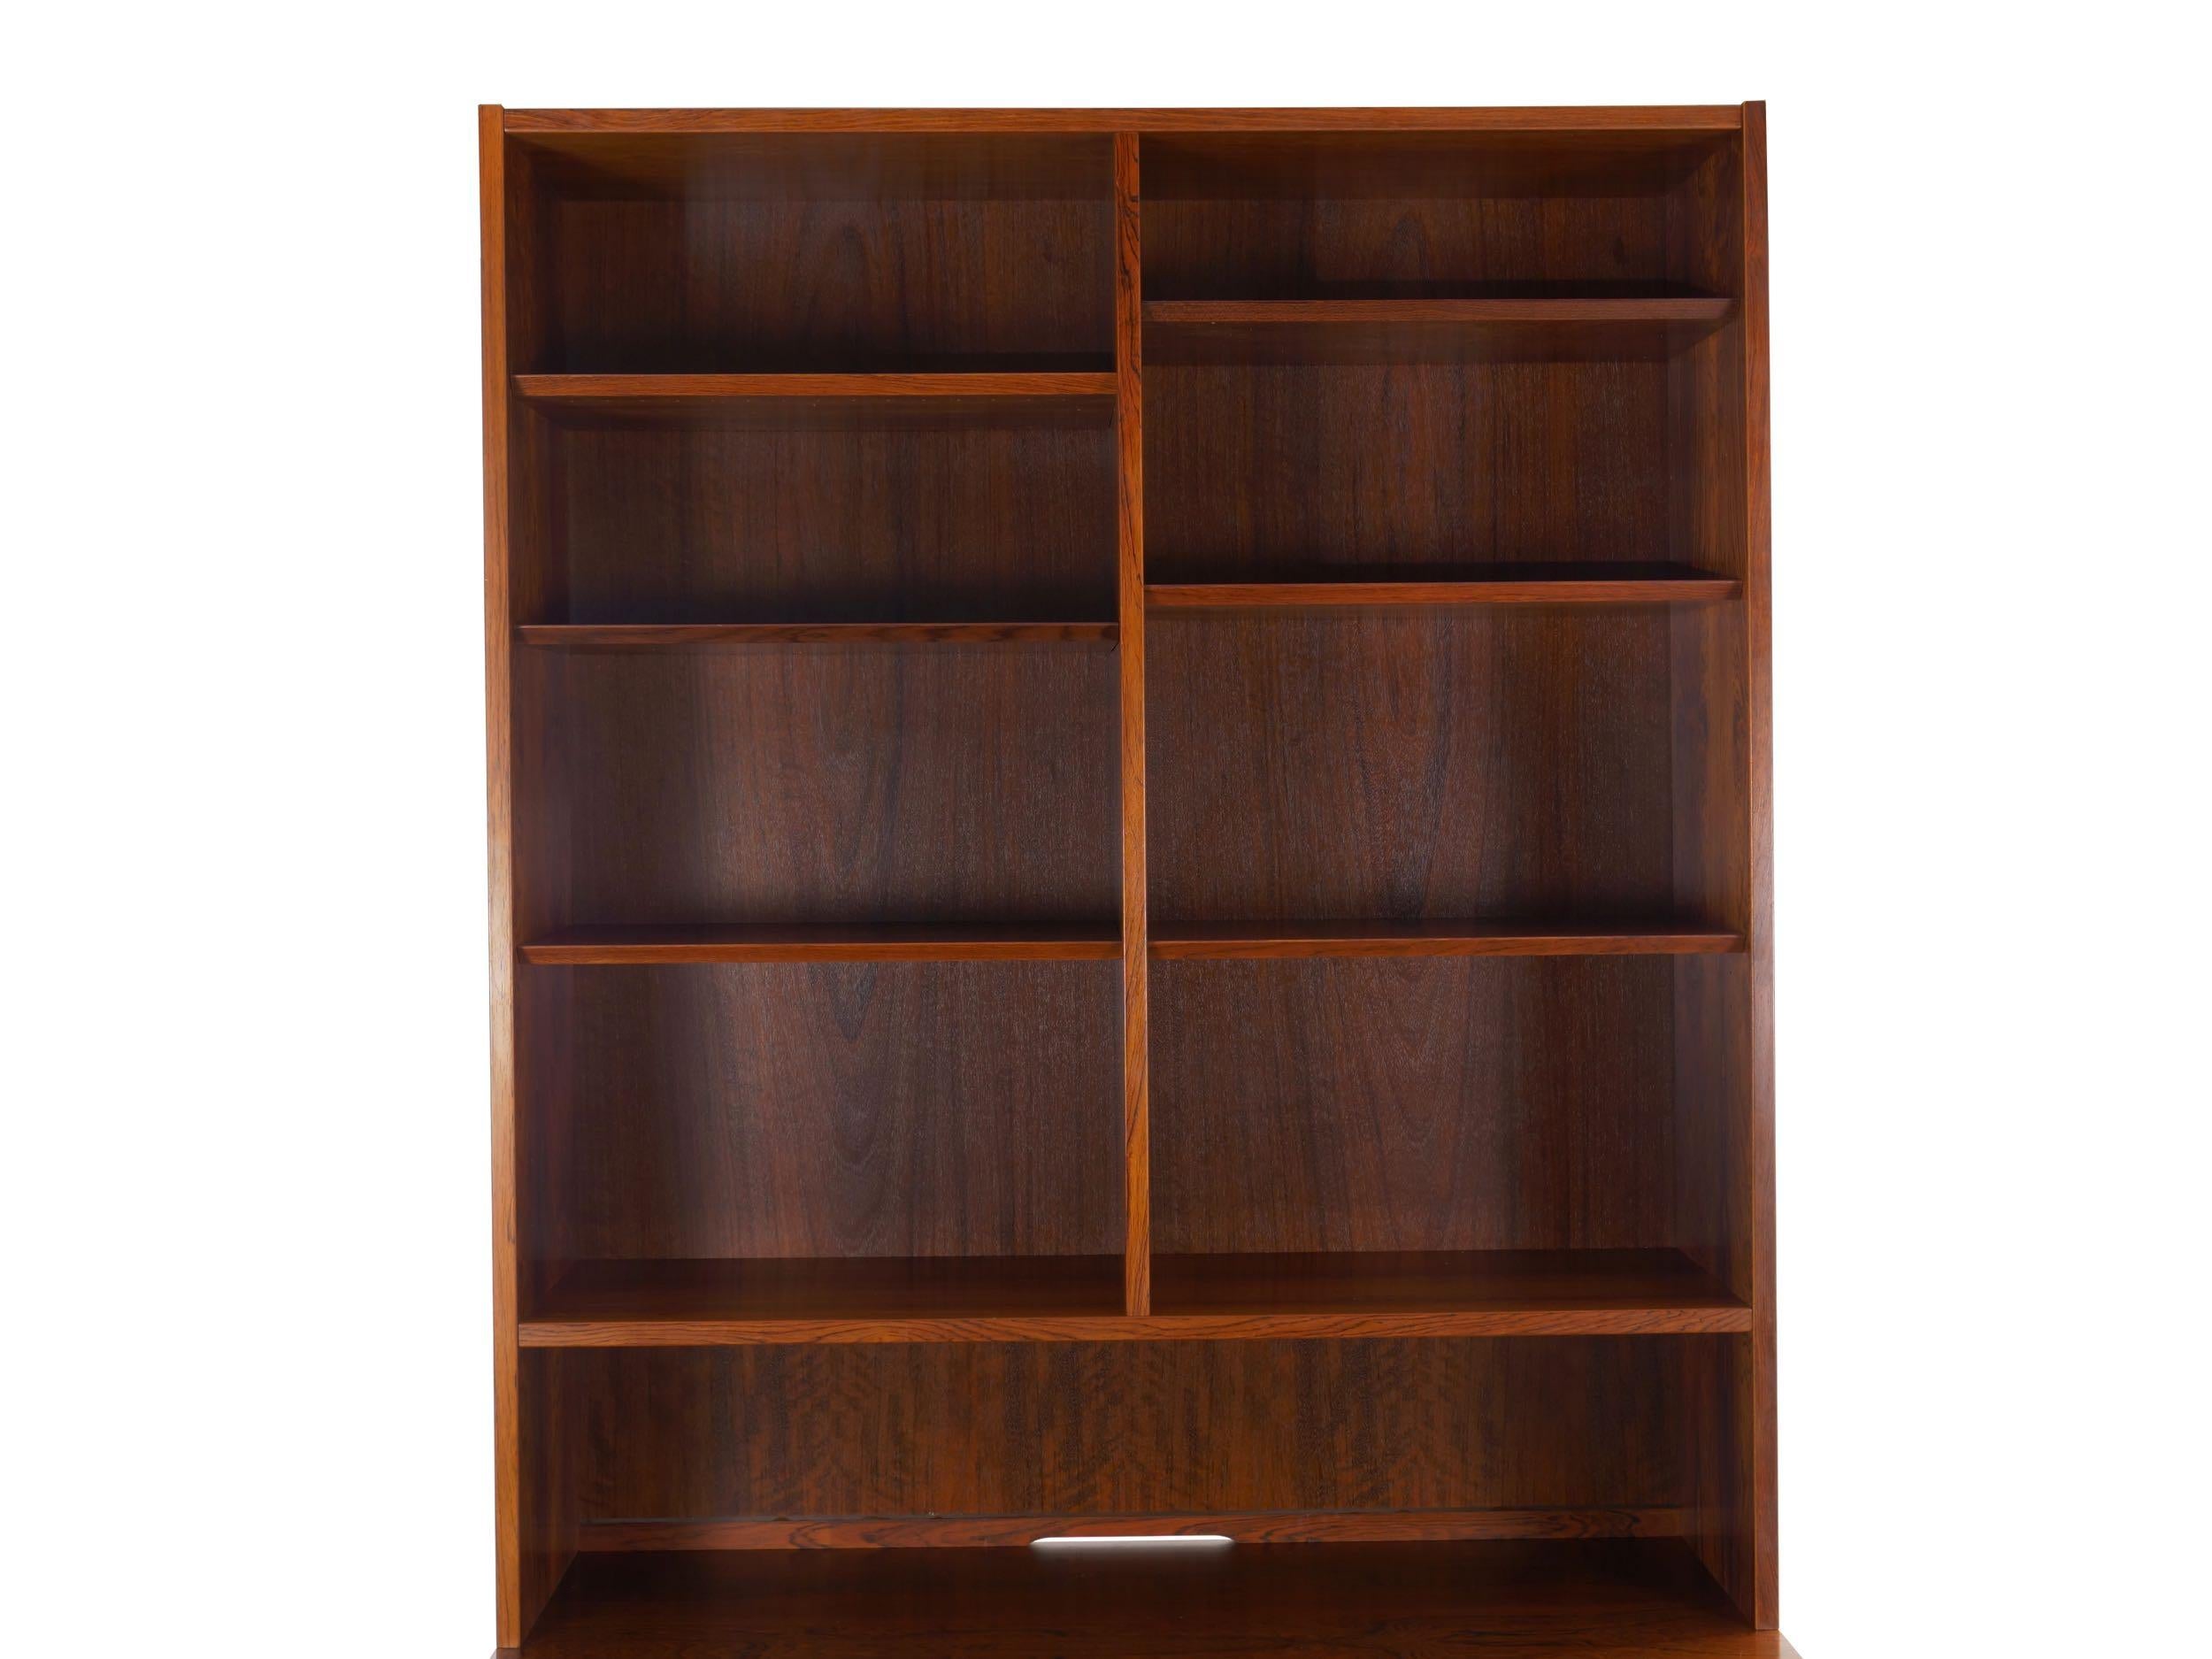 Danish Mid-Century Modern Rosewood Bookcase over Cabinet by Poul Hundevad 1